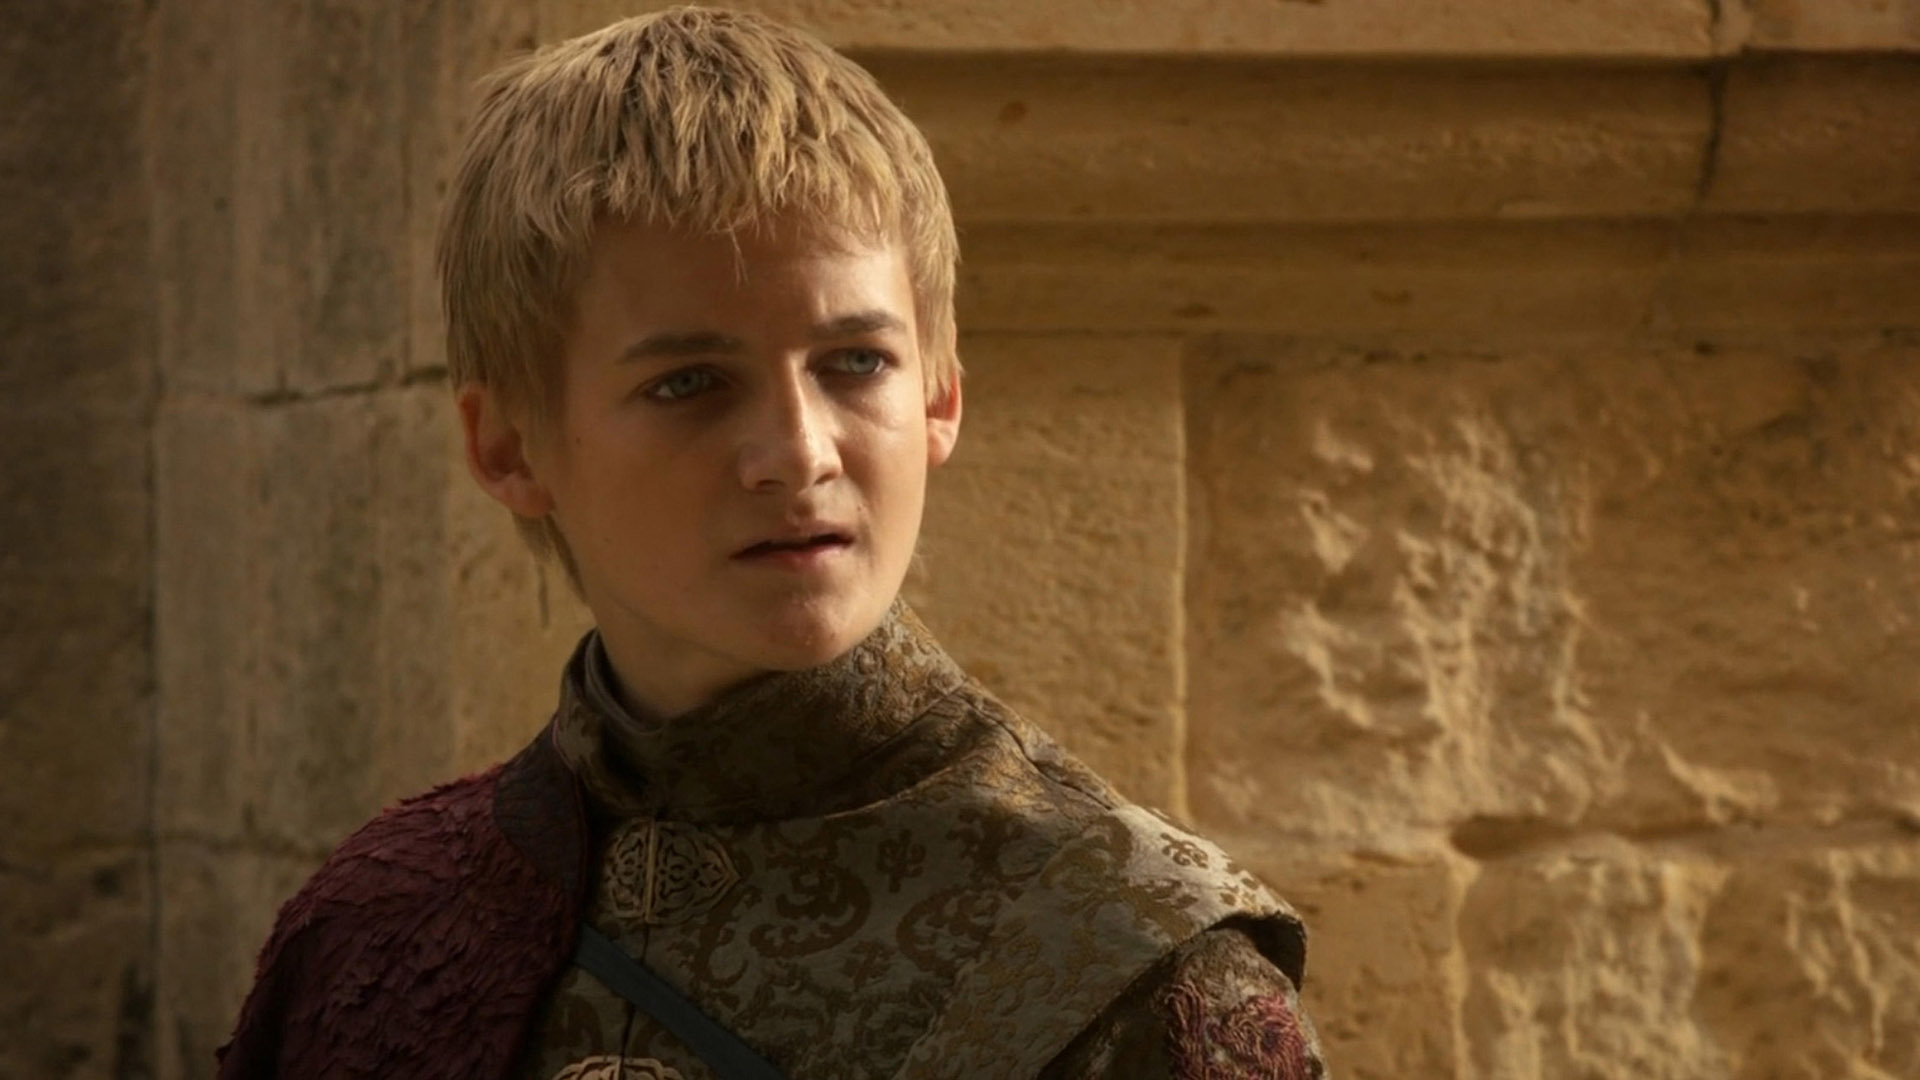 5 Most Evil Game of Thrones Characters, Ranked from Worst to… Even Worse